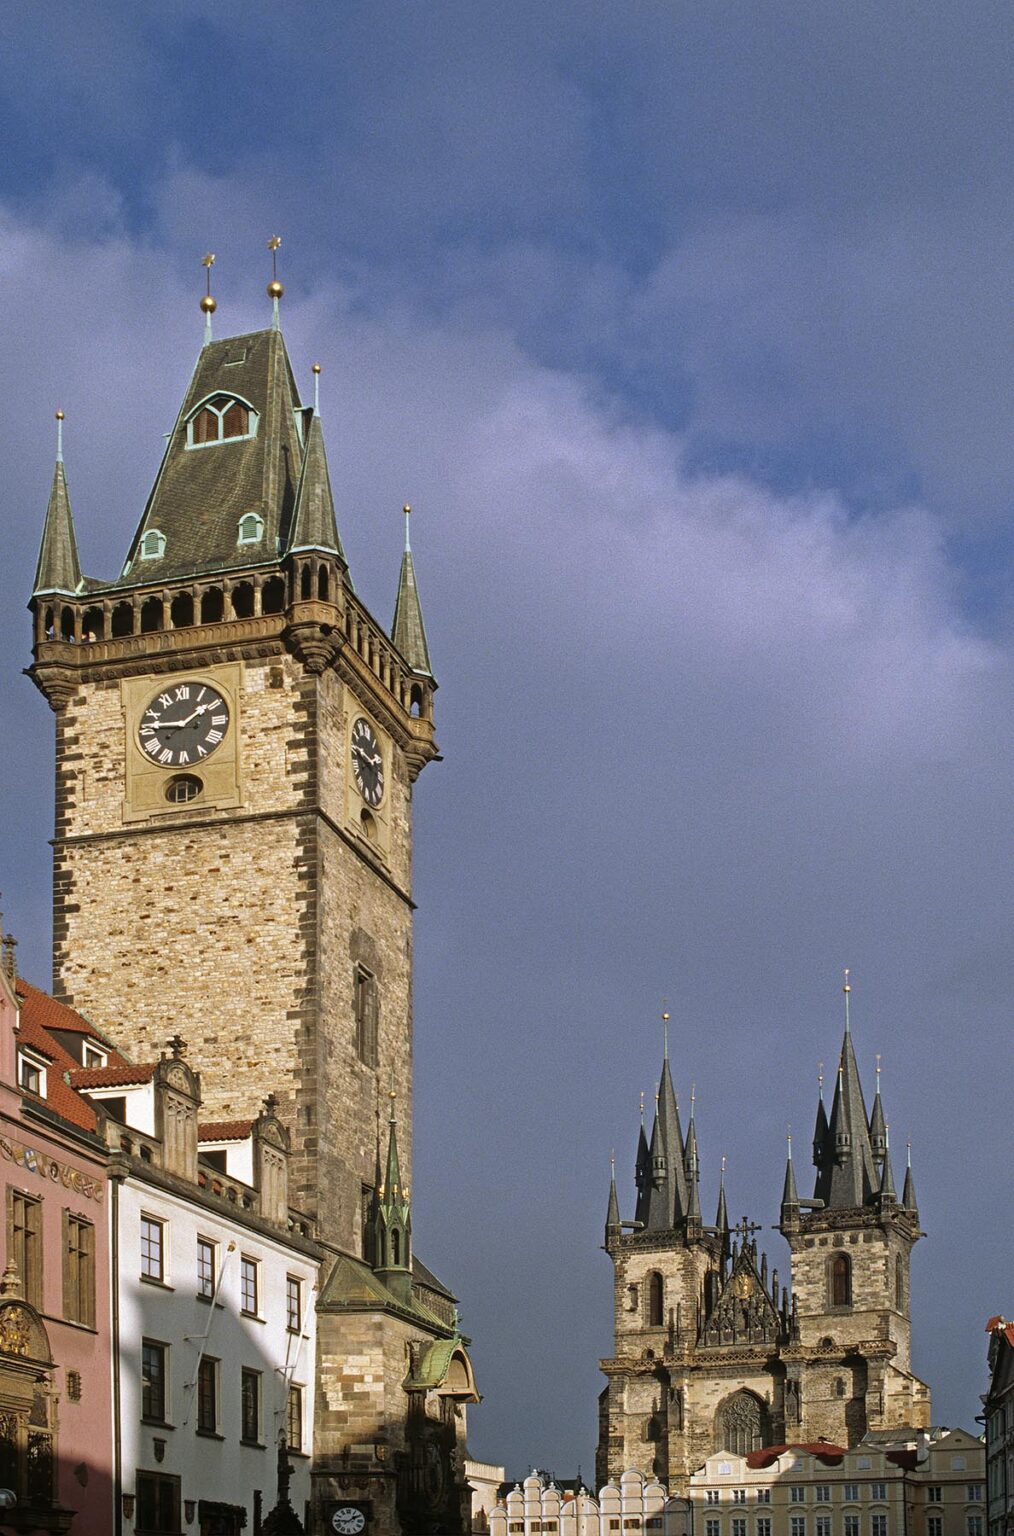 The CLOCK TOWER of OLD TOWN HALL with the GOTHIC TYN CHURCH behind - PRAGUE, CZECH REPUBLIC